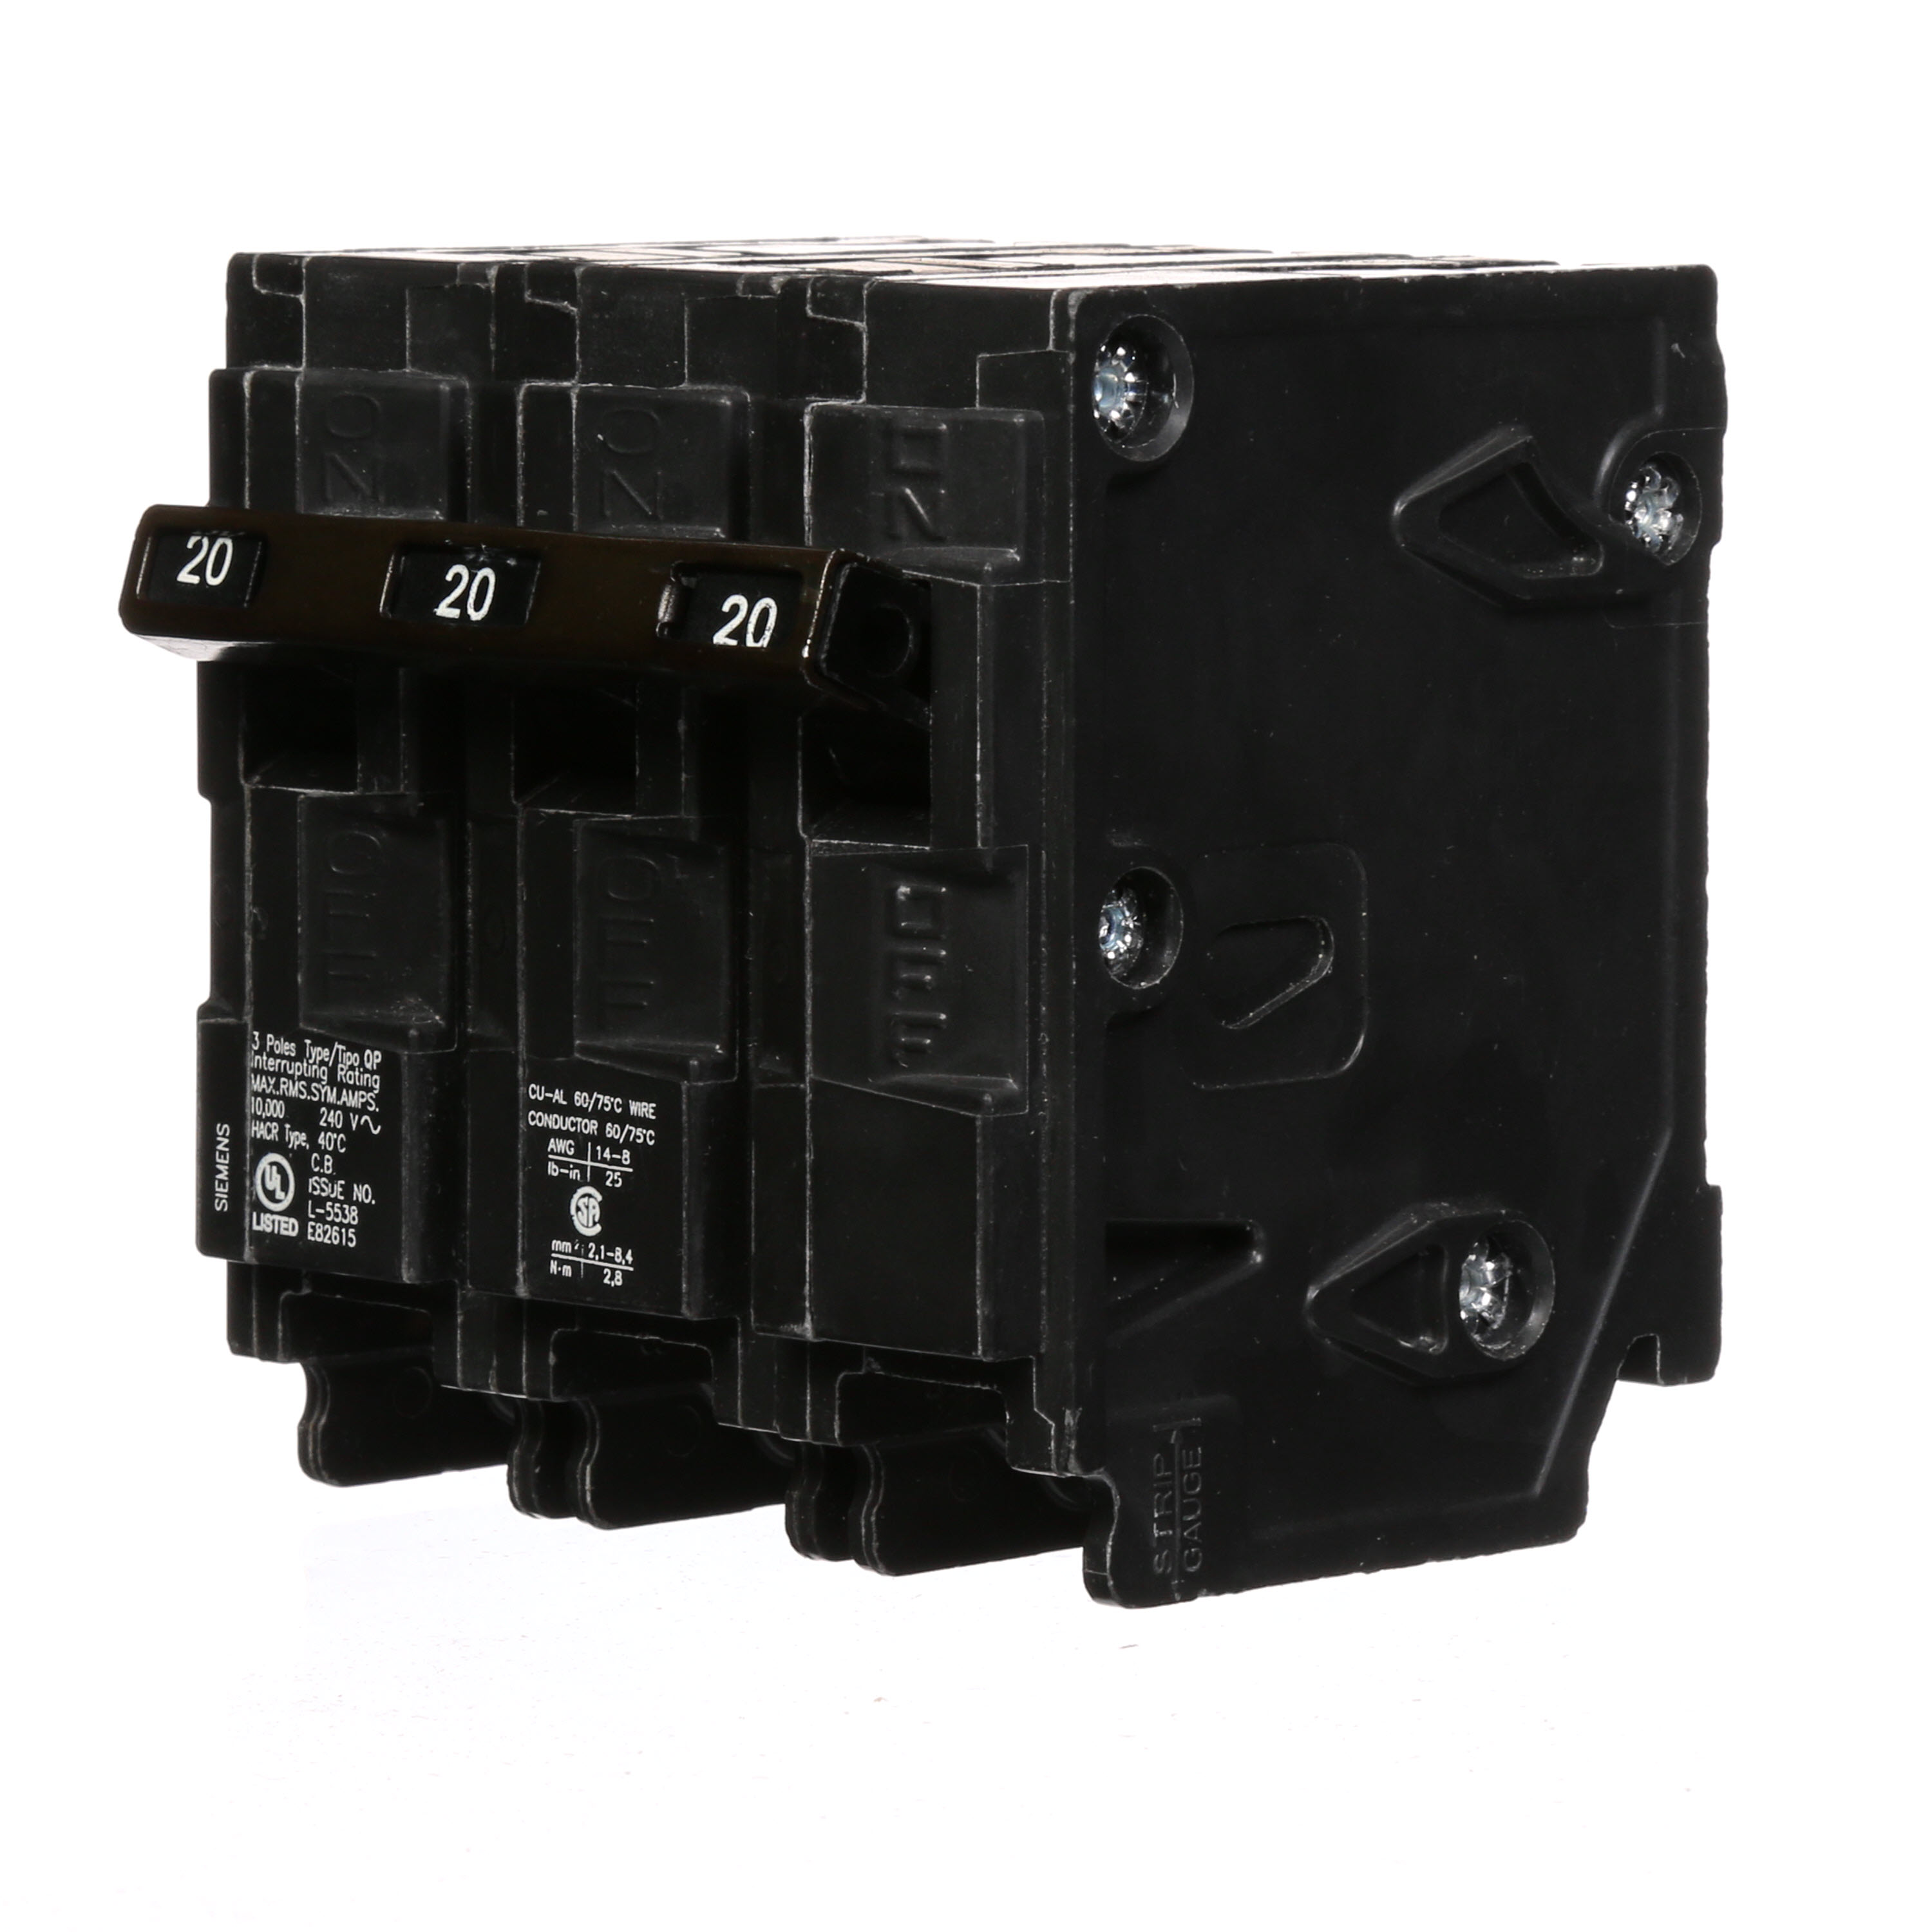 Siemens Low Voltage Residential Circuit Breakers Miniature Thermal Mag Circuit Breakers - Type QP/MP, 3-Pole, 240VAC are Circuit Protection Load Center Mains, Feeders, and Miniature Circuit Breakers. Type QP/MP Application Electrical Distribution Standard UL 489 Voltage Rating 240V Amperage Rating 20A Trip Range Thermal Magnetic Interrupt Rating 10 AIC Number Of Poles 3P